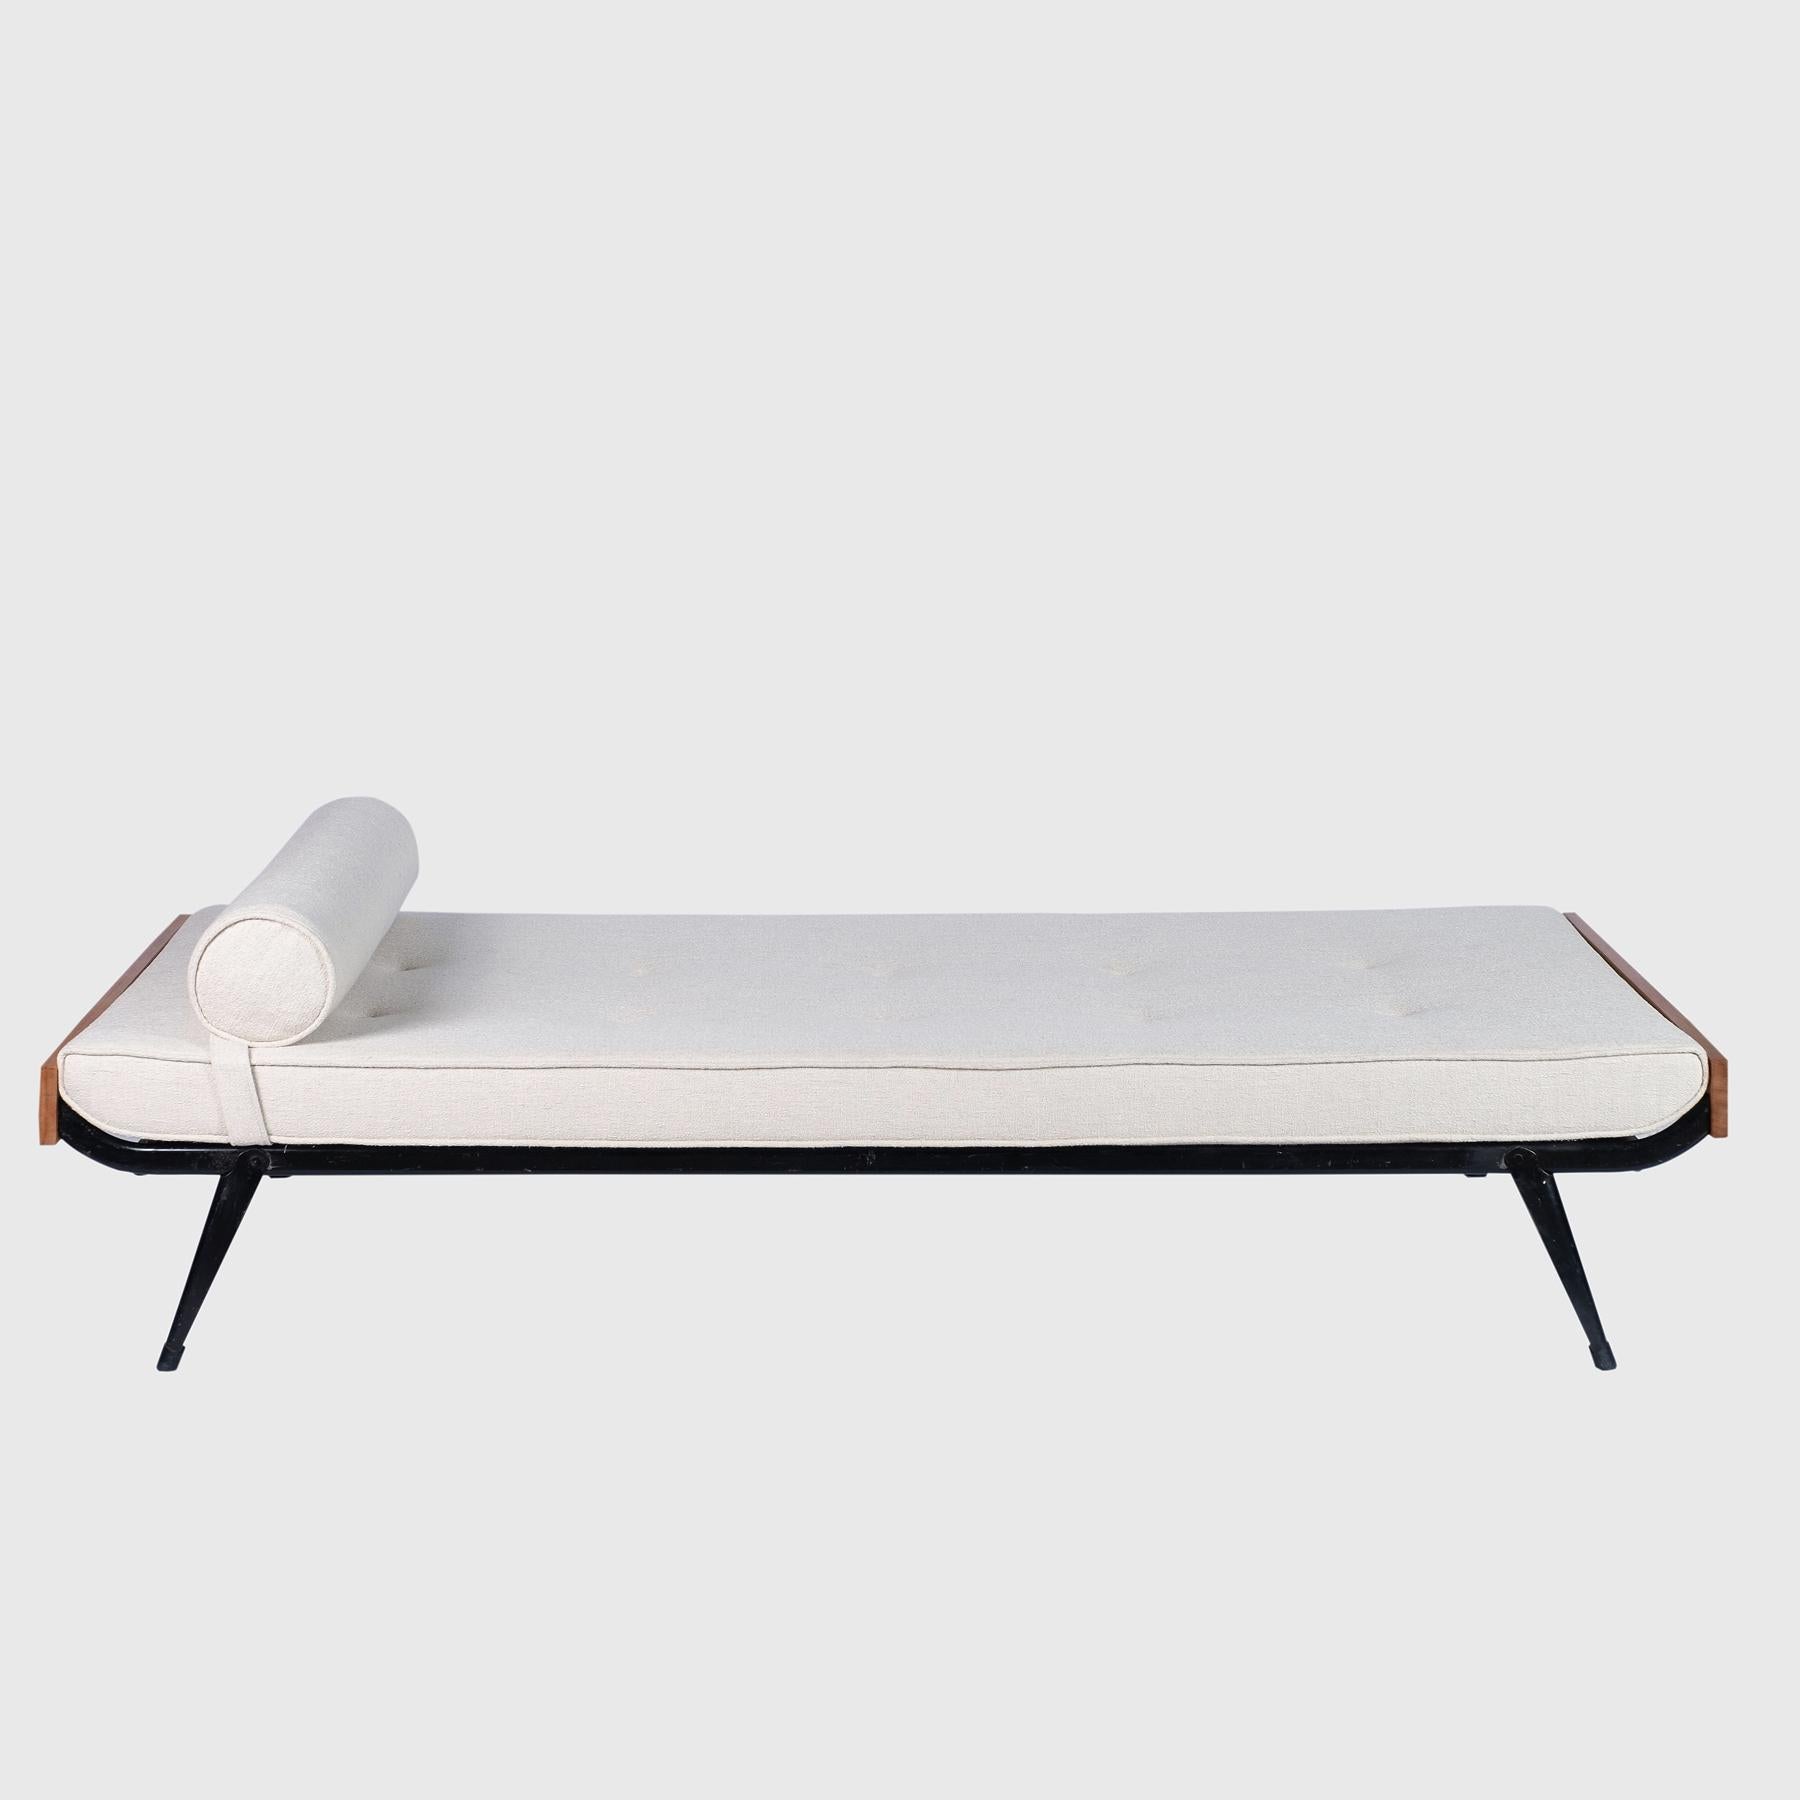 Mid-Century Modern Daybed by Mertens Jomer, Netherlands 1950/60 For Sale